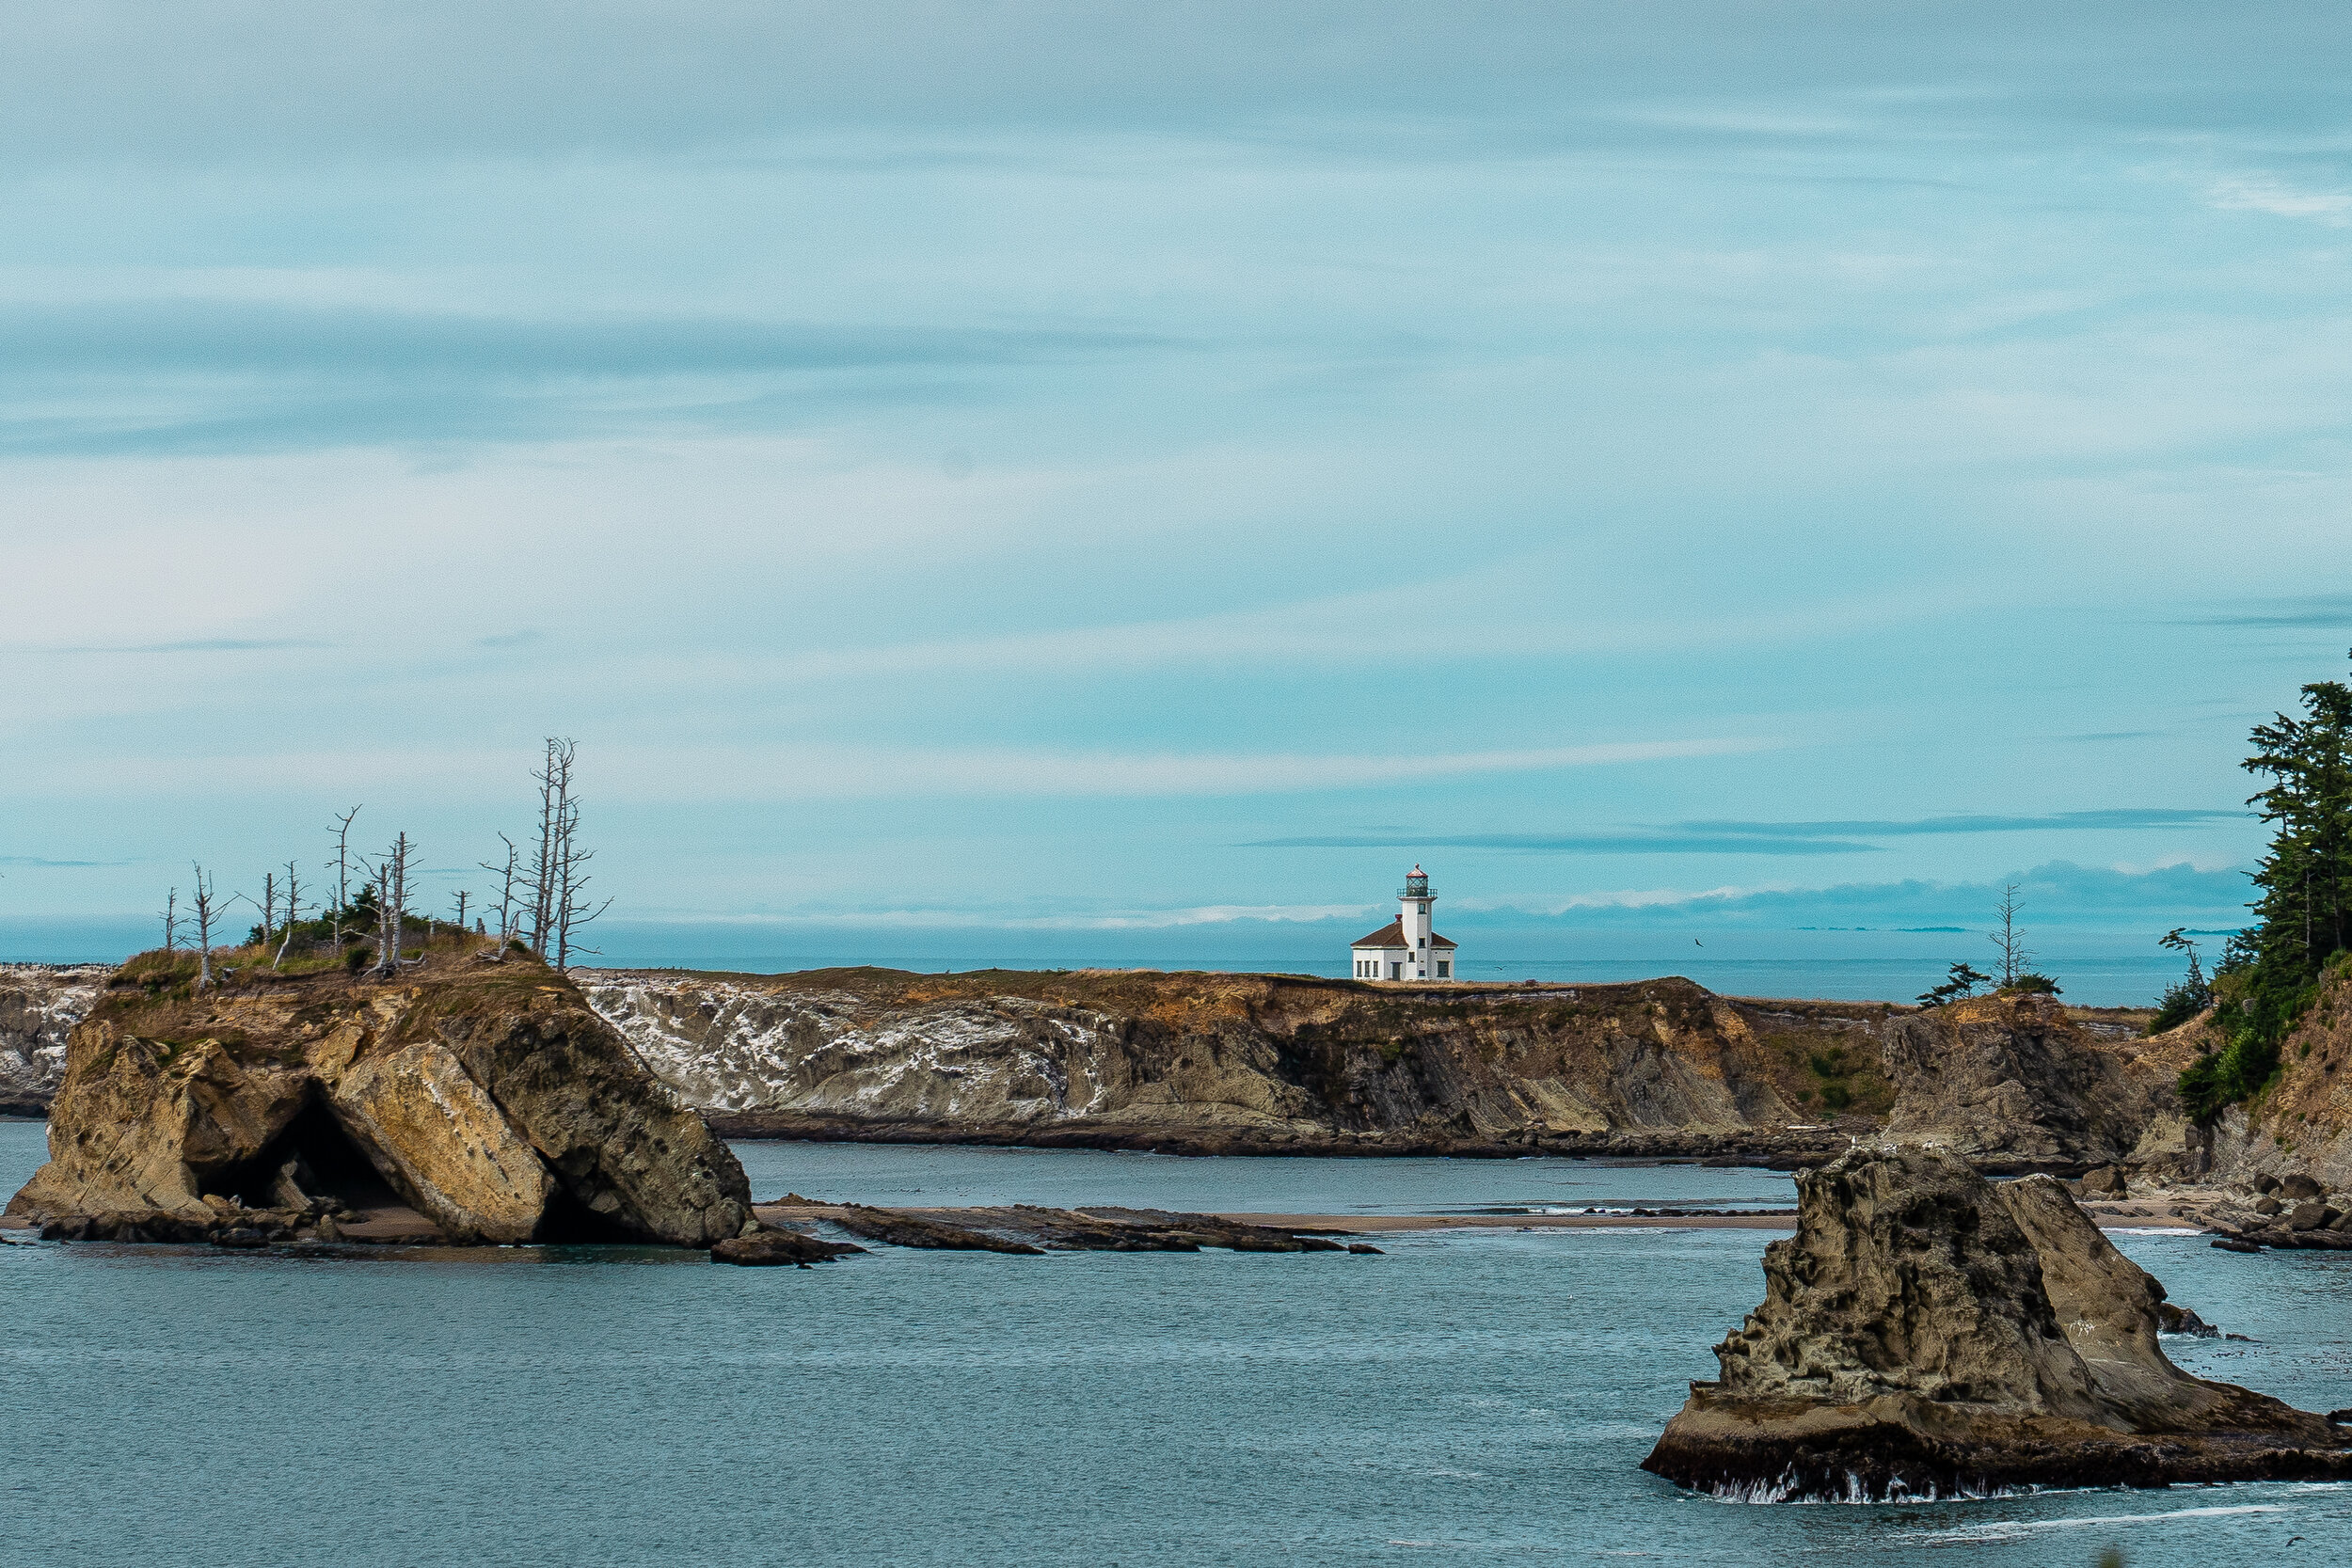  From Sunset Bay State Park, we can see  Cape Arago Lighthouse . In operation from 1934-2006, this smaller-scale lighthouse is listed on the National Register of Historic Places but is not open to the public, and is encircled in a fence so that no on